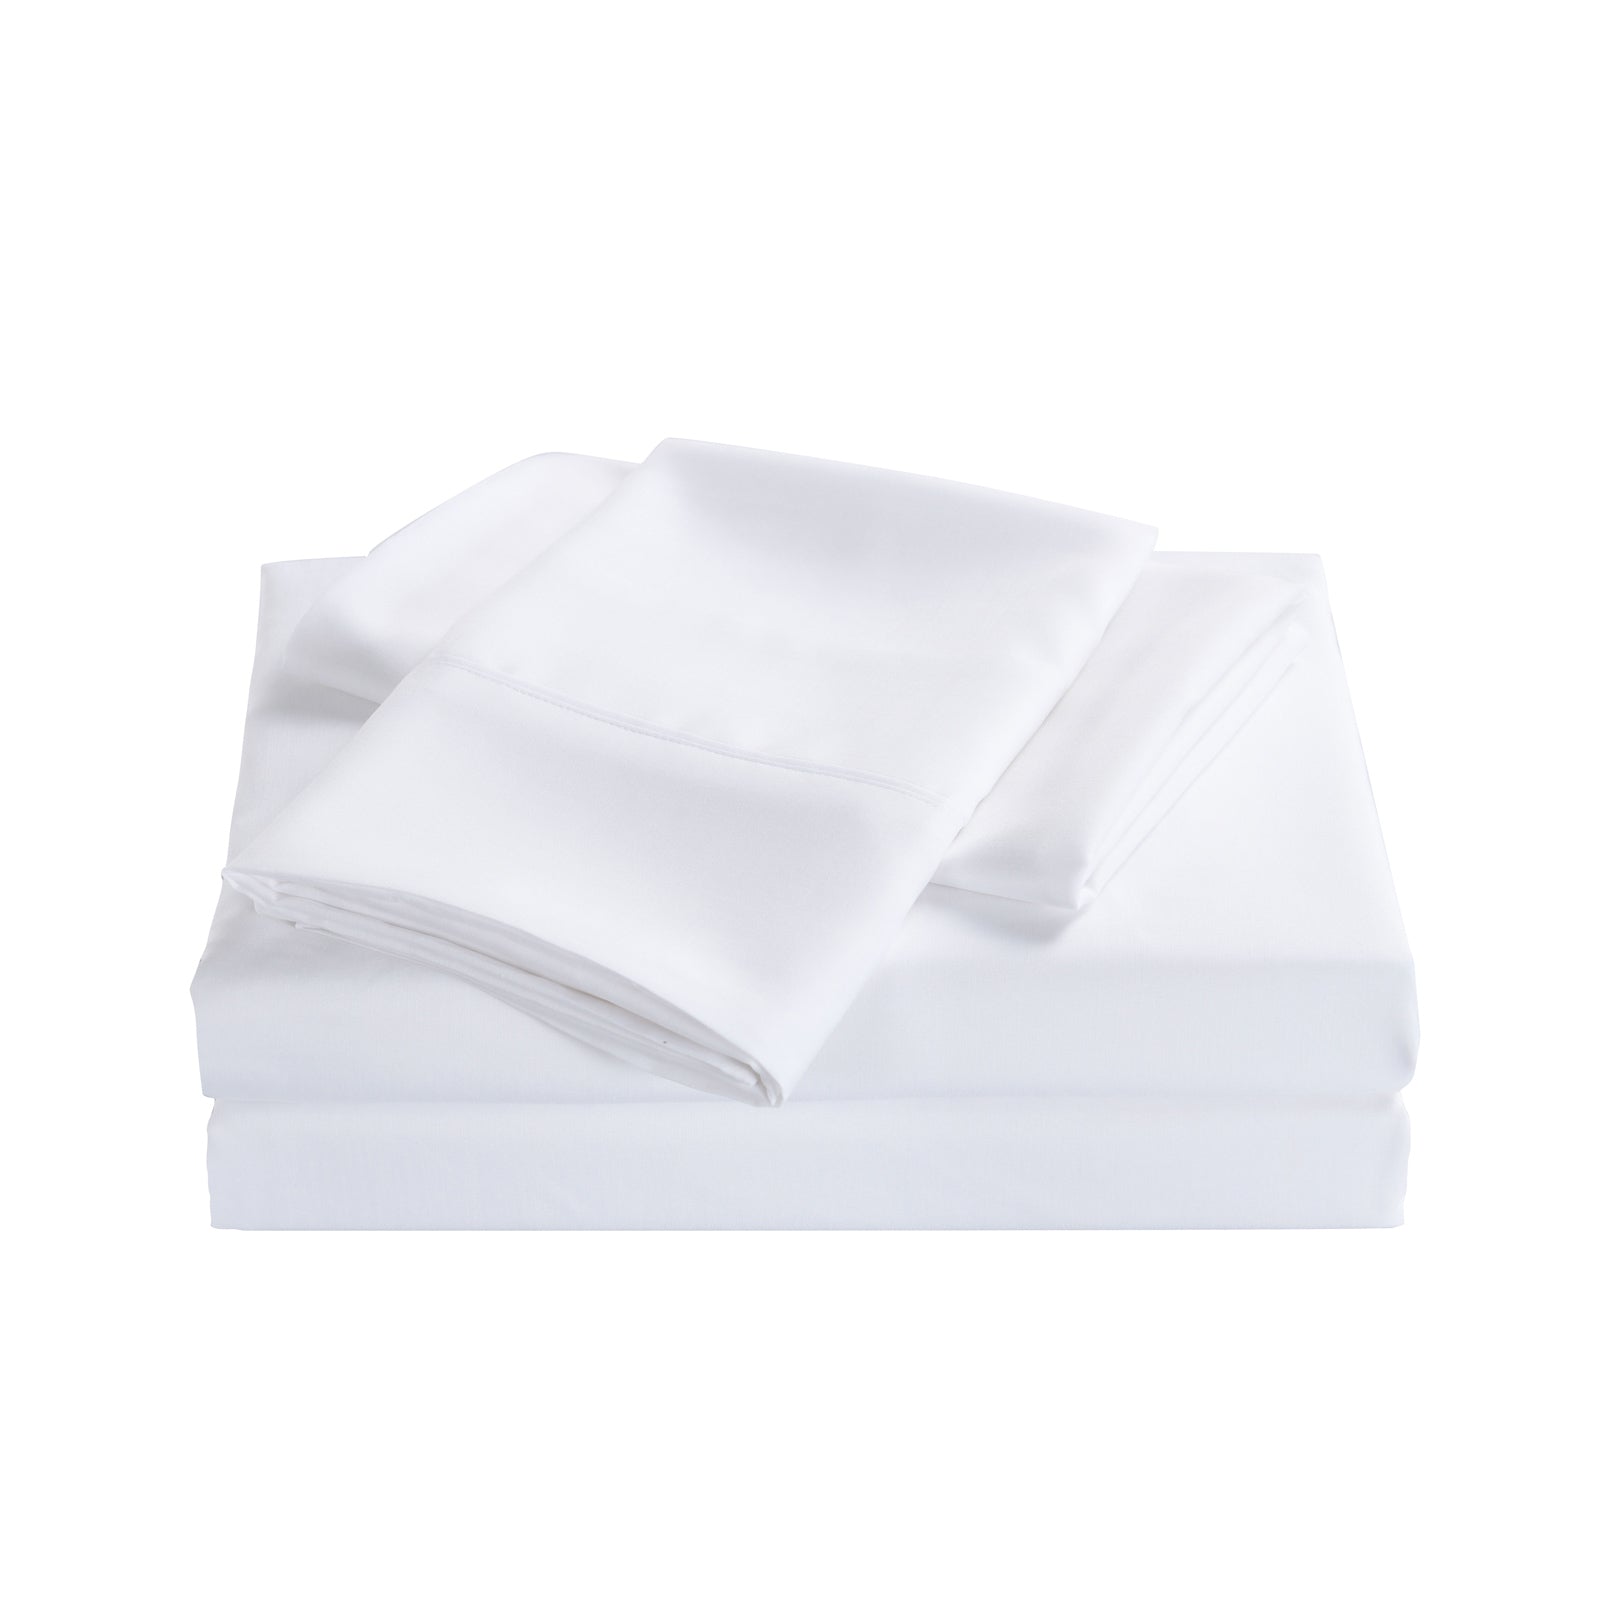 Royal Comfort 2000 Thread Count Bamboo Cooling Sheet Set Ultra Soft Bedding - King Single - White from Deals499 at Deals499